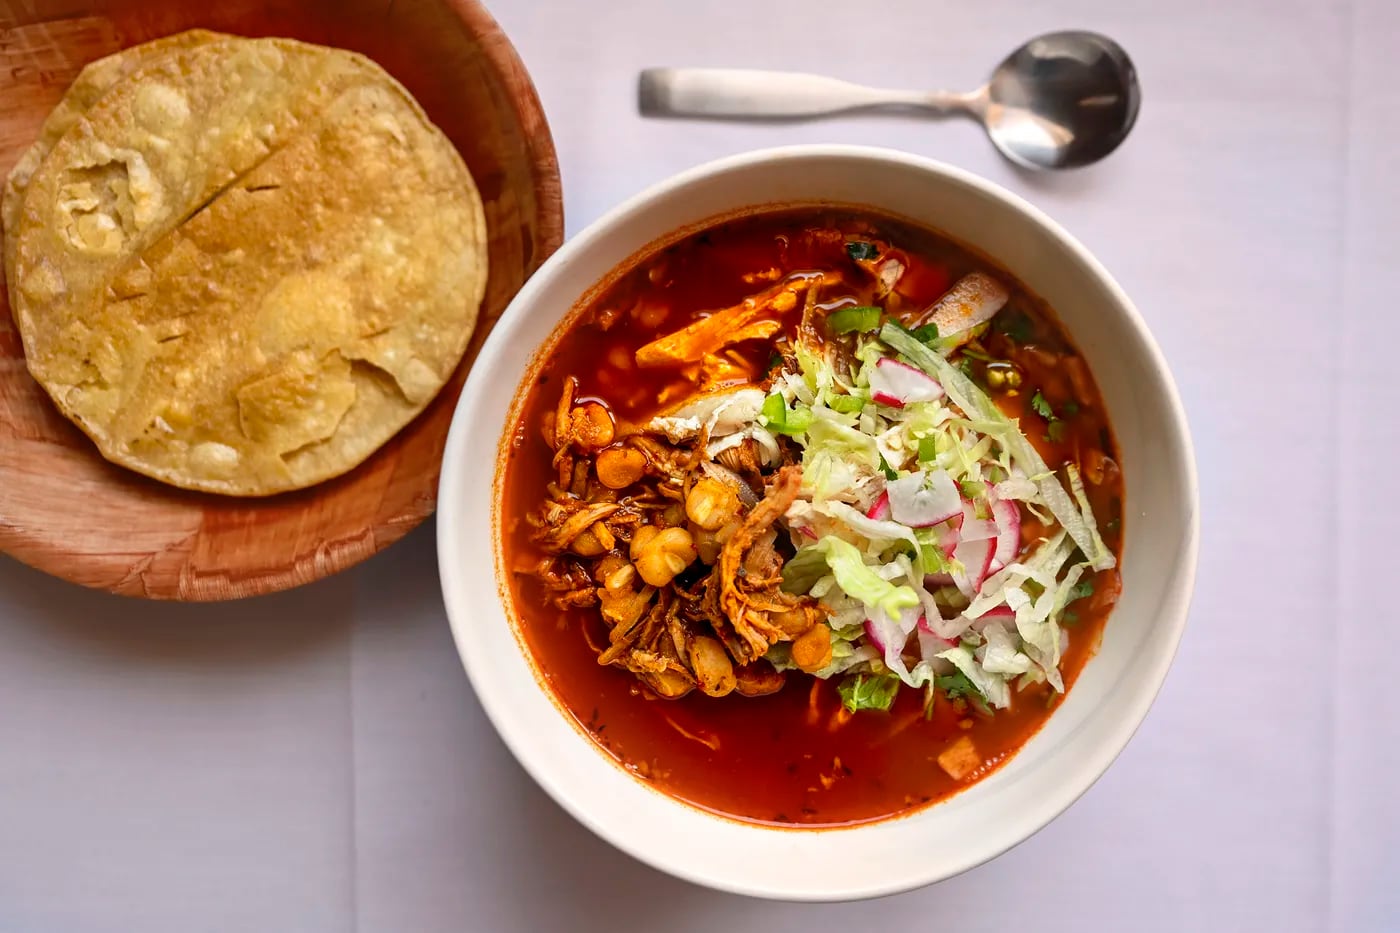 The pozole rojo is a soulful bowl of hominy stew with chicken at Los Machetes.